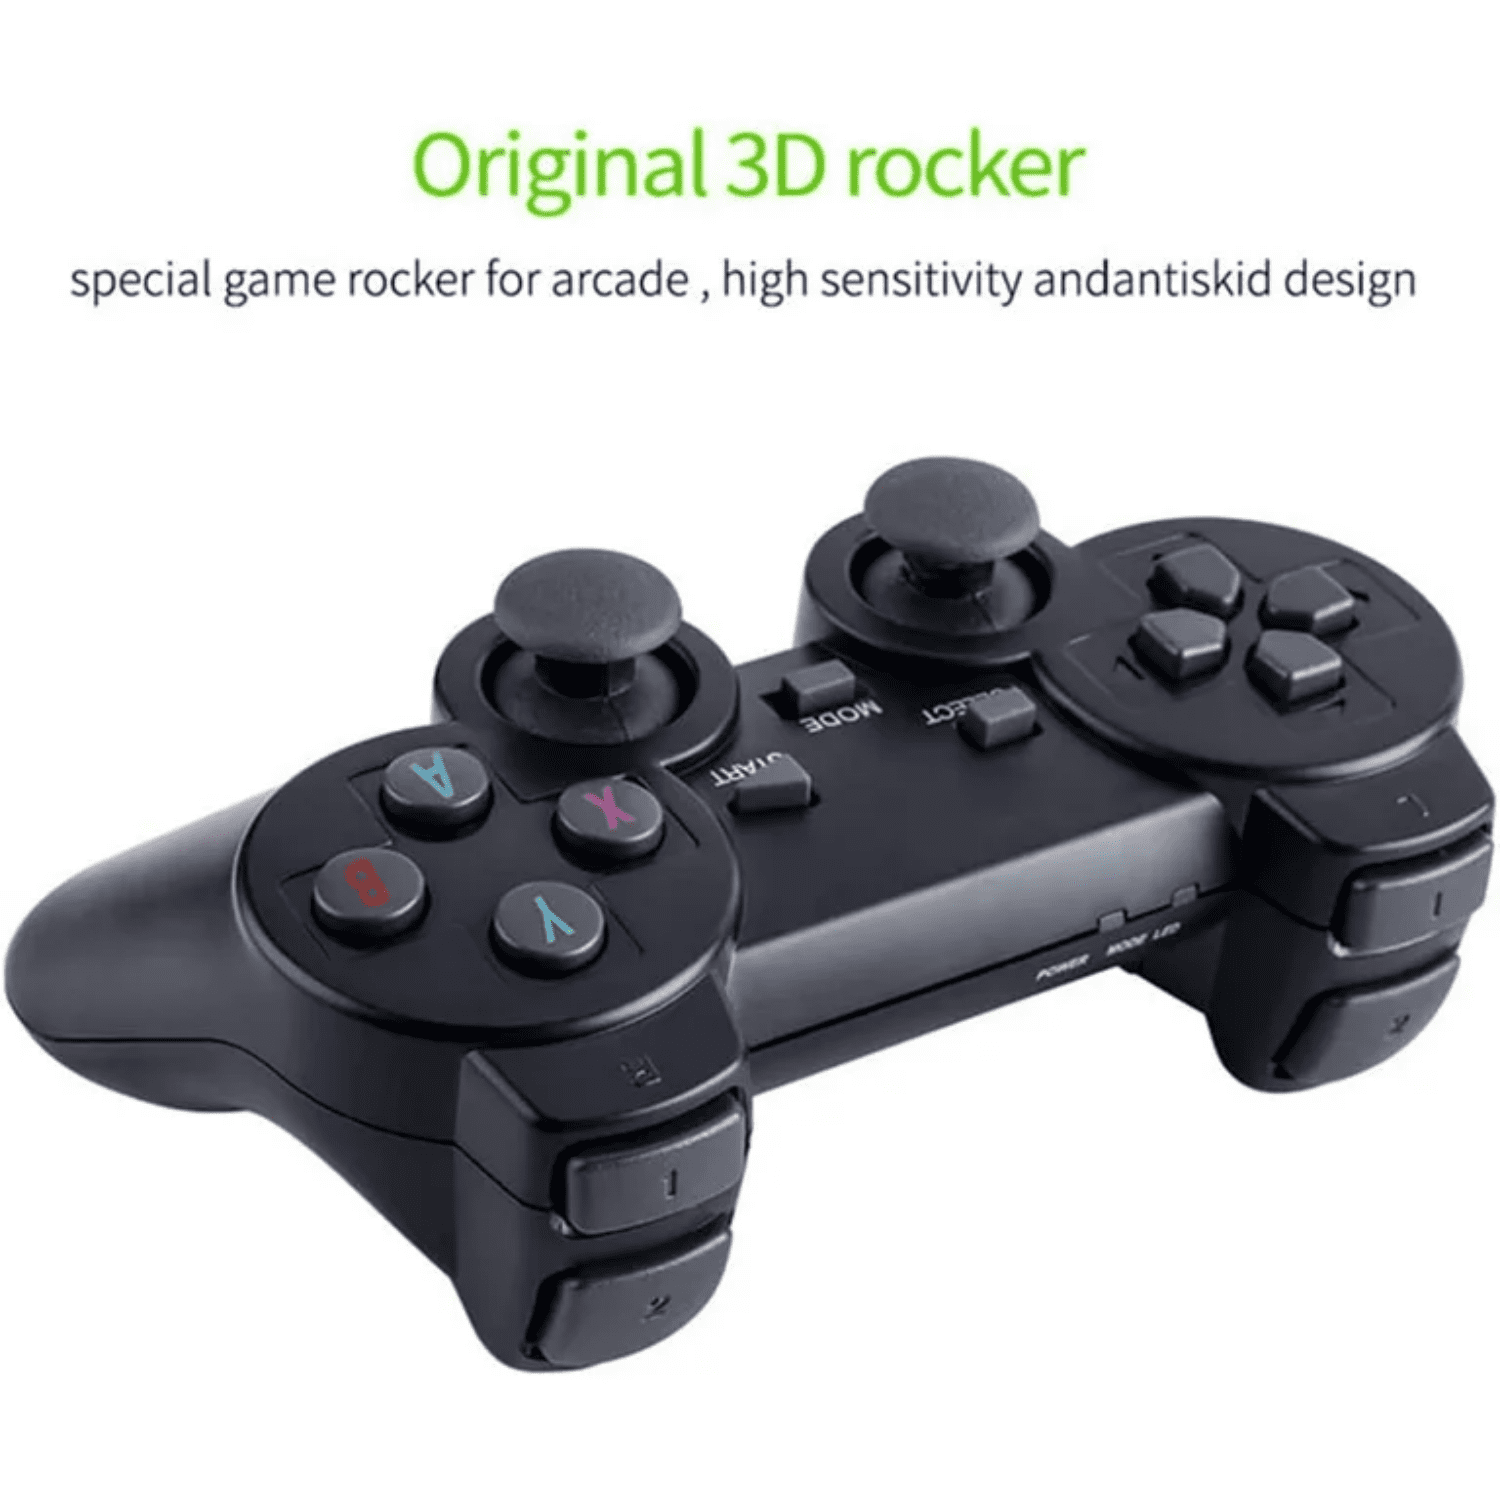 HDMI 4K TV Game Stick 64G 10000+ Game Video Game Consoles w/2 Wireless  Gamepad 64G 10000+ games 